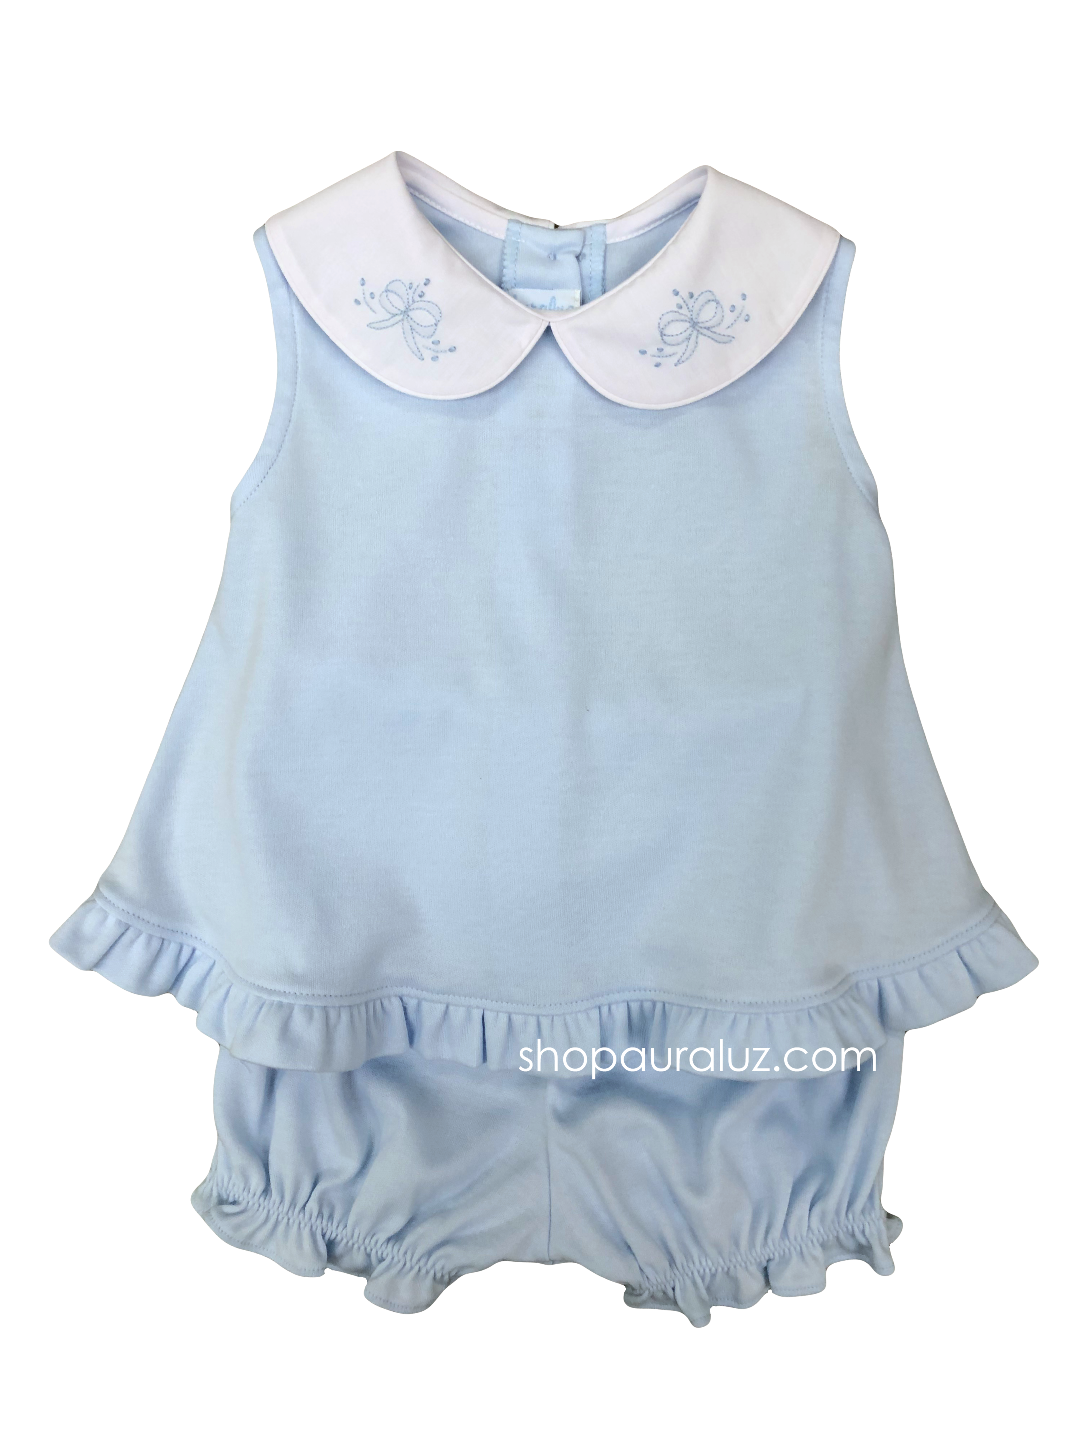 Auraluz Girl Sleeveless 2pc Knit Set...Blue with white p.p. collar and embroidered bows